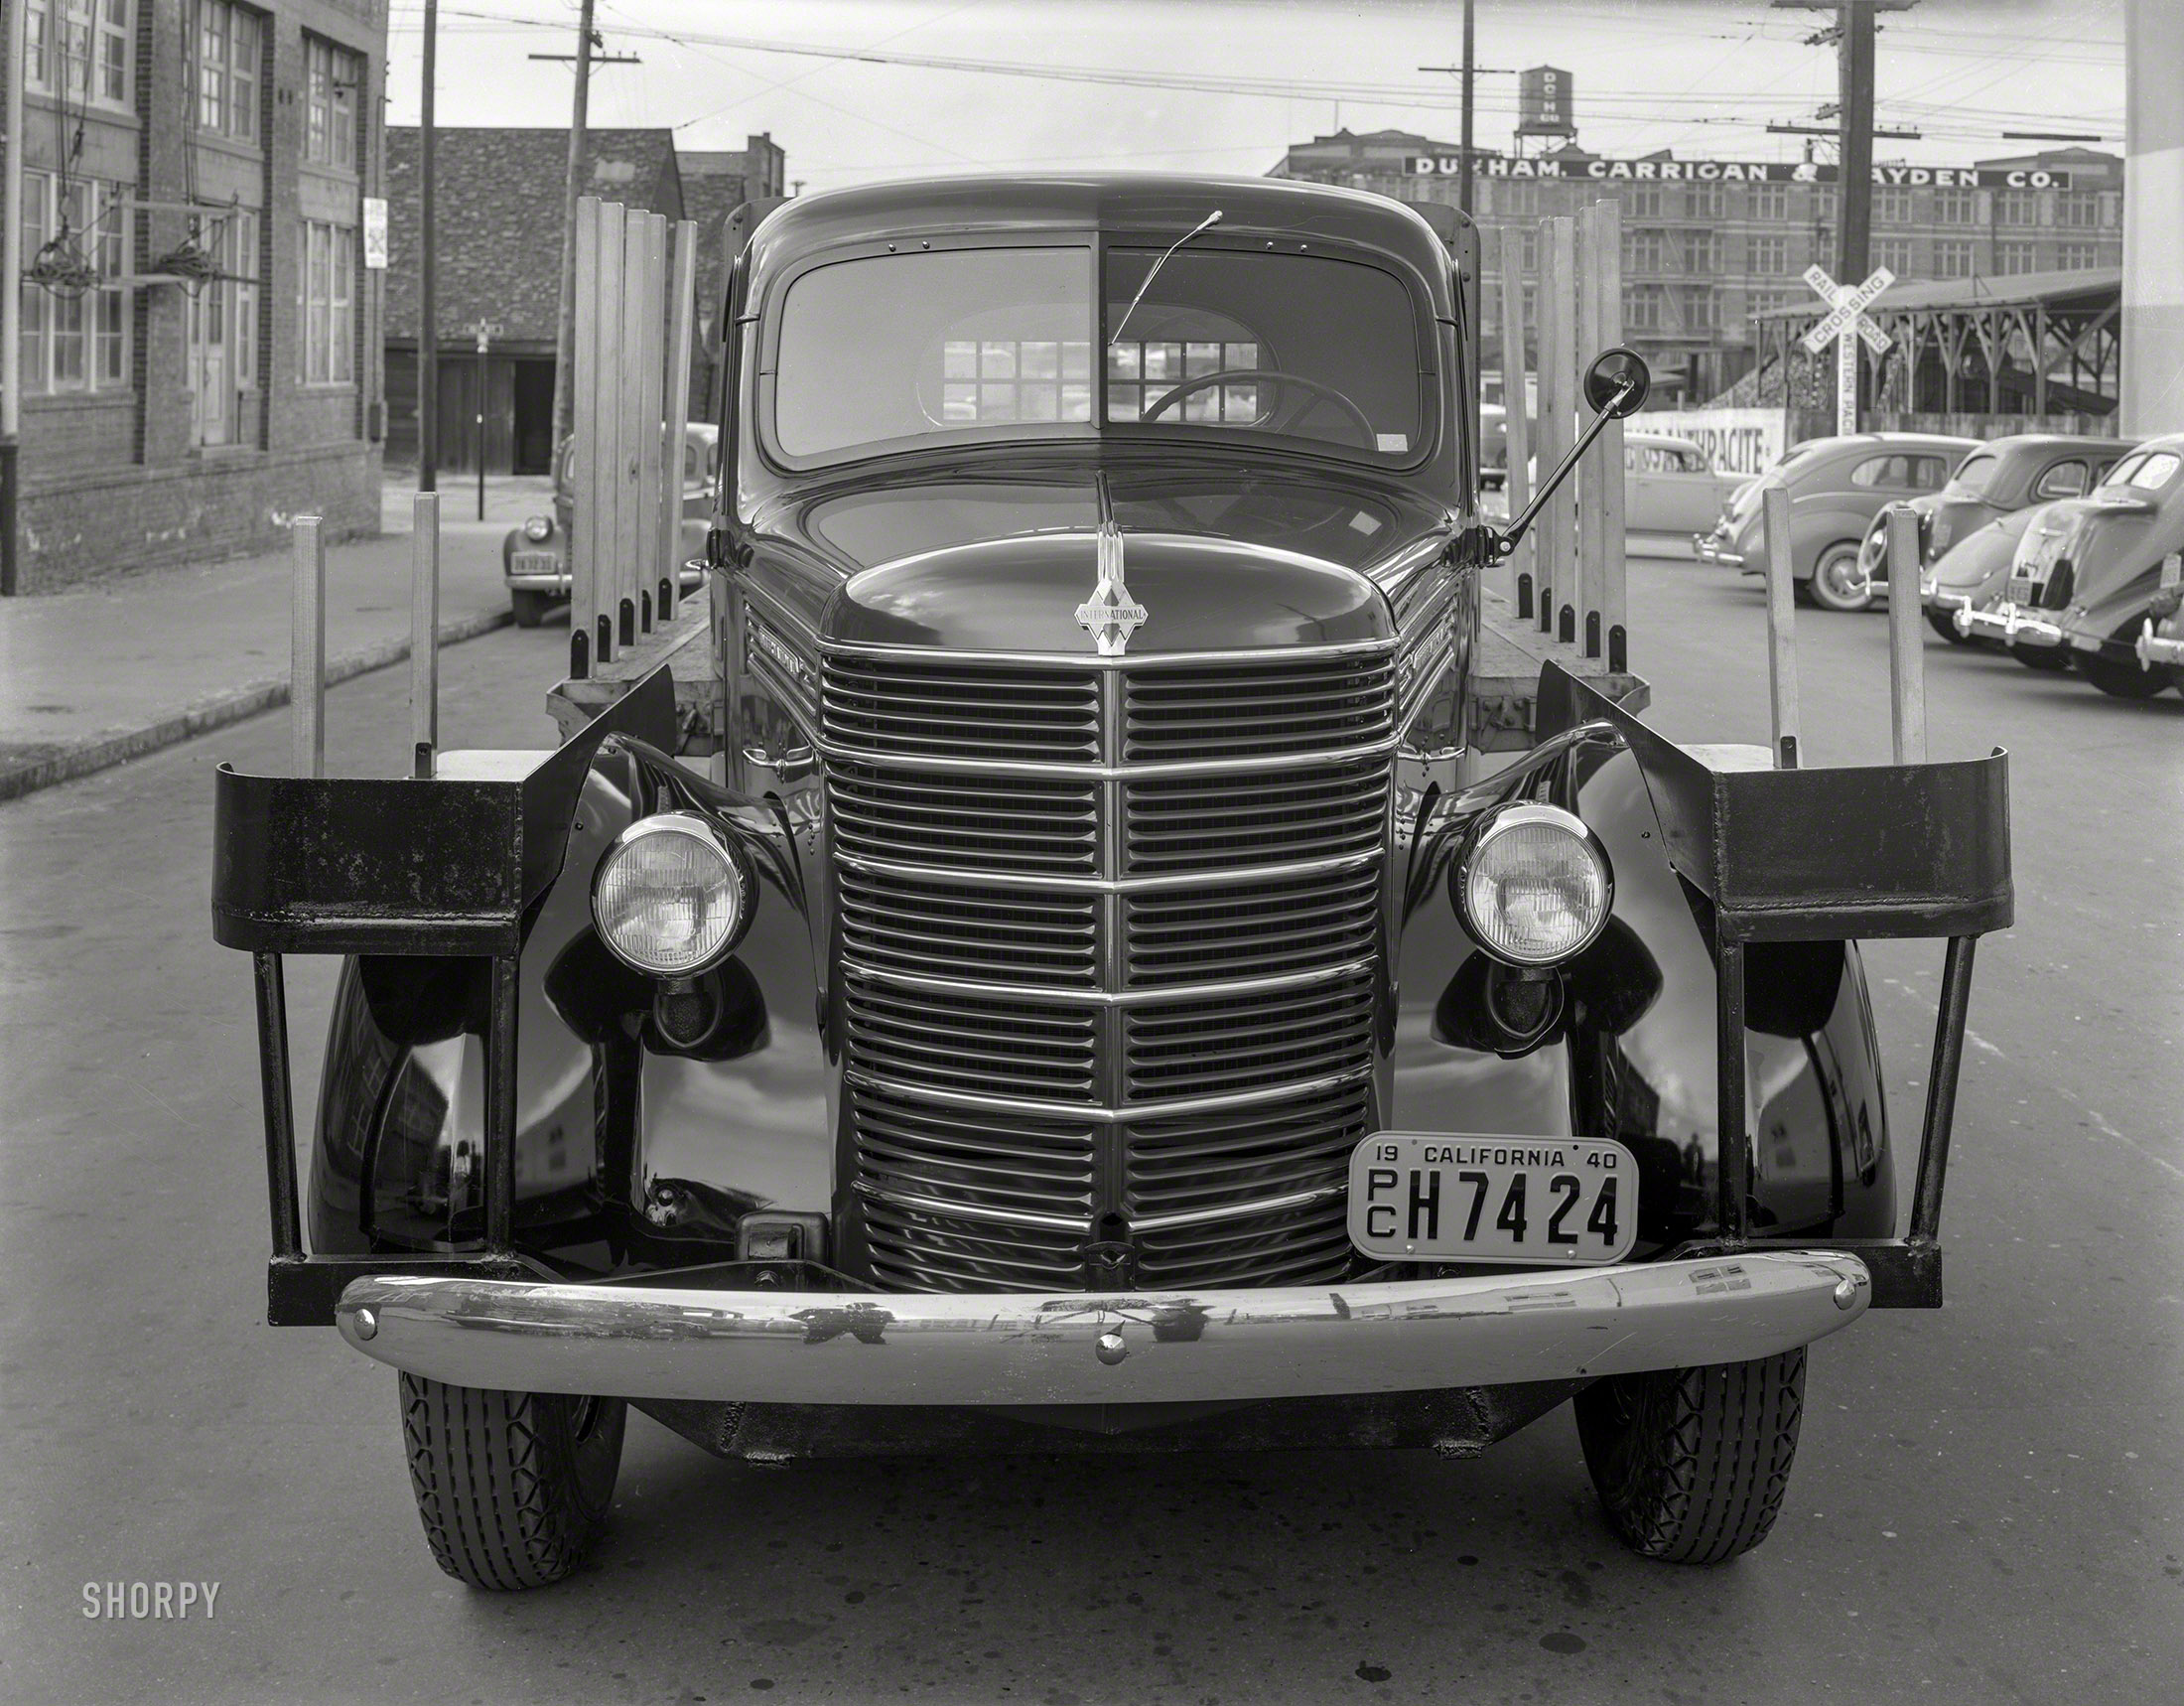 San Francisco, 1940. "International stake bed truck." Ready to roll up its sleeves and get to work. 8x10 inch acetate negative. View full size.